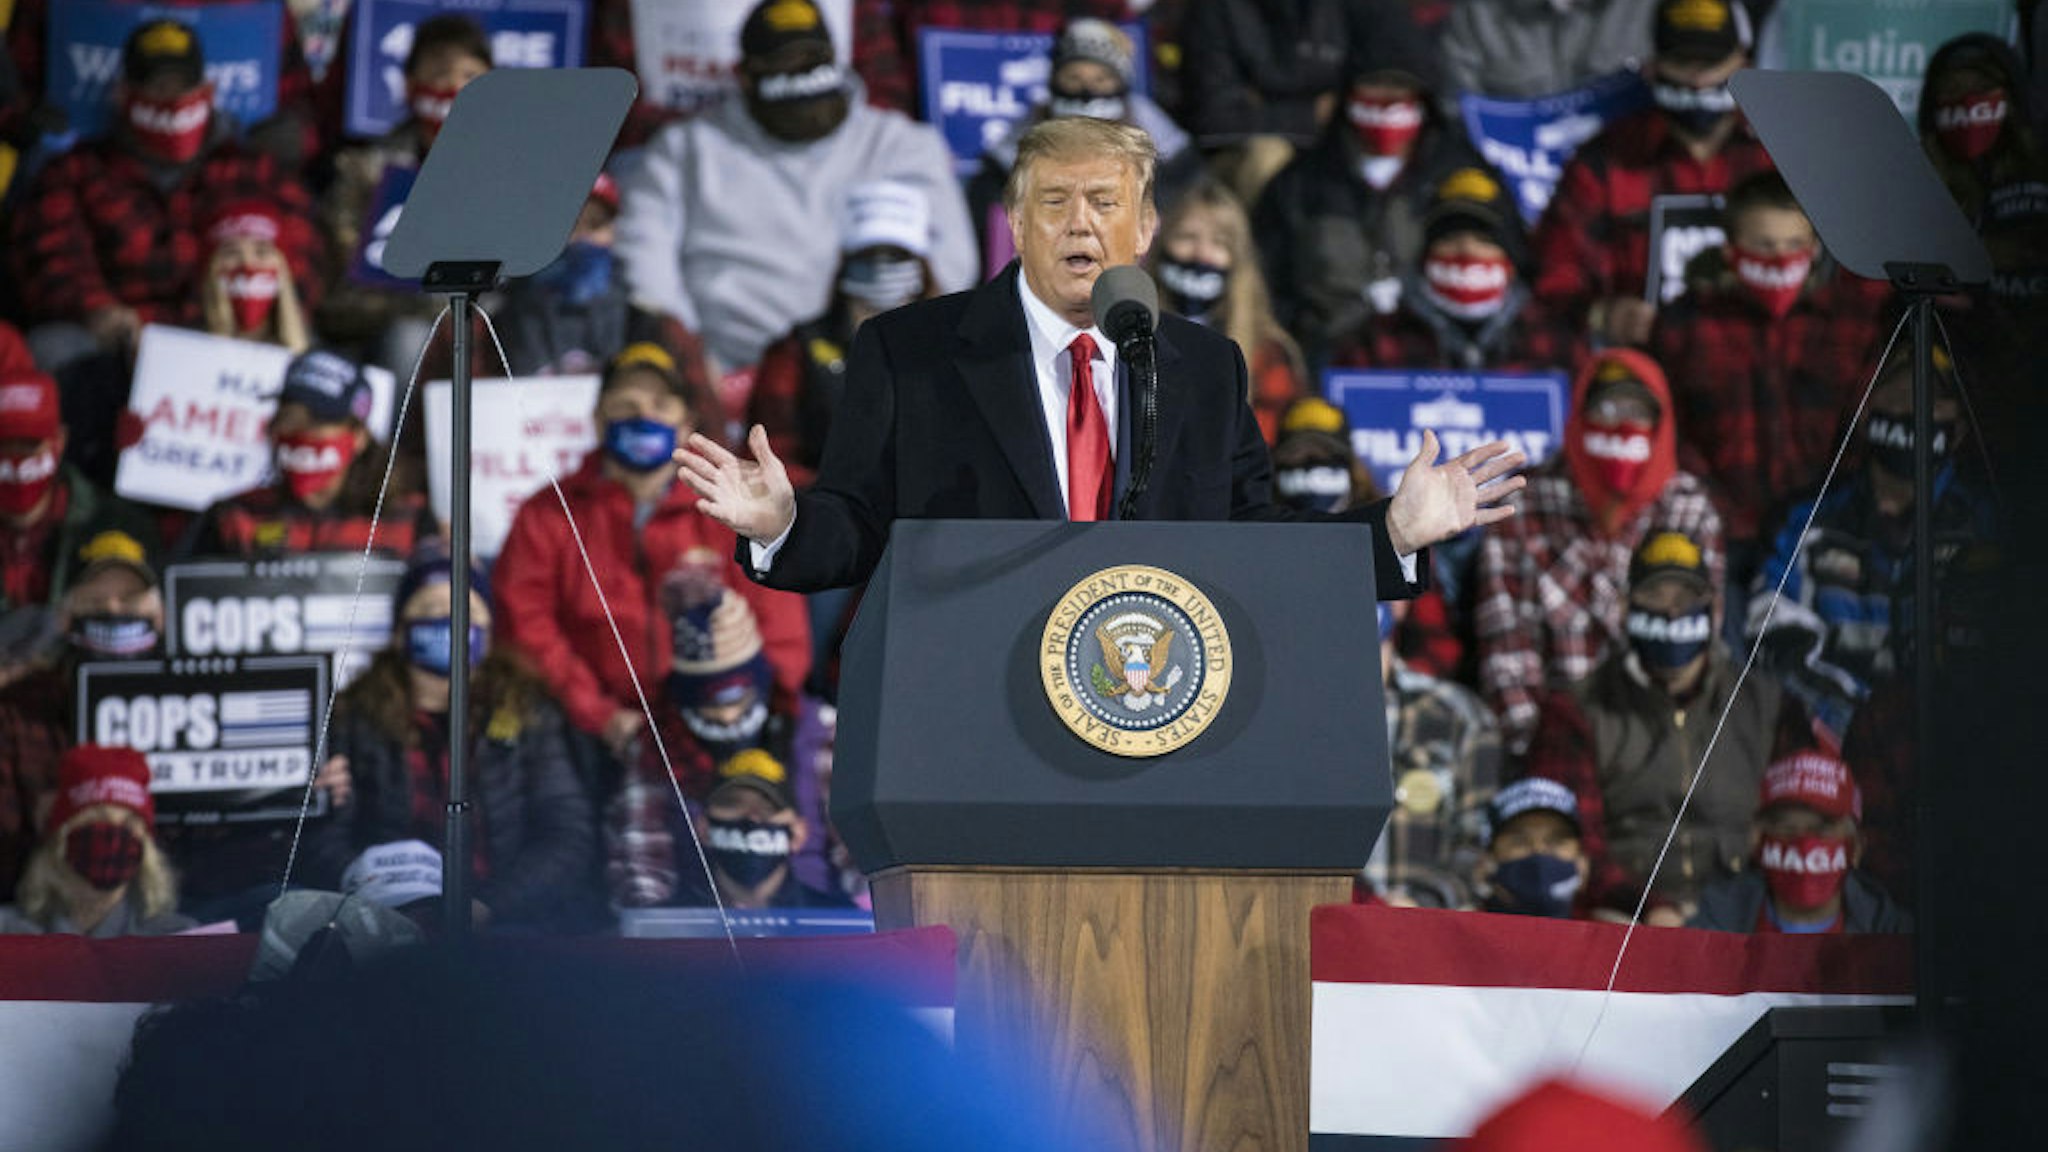 U.S. President Donald Trump speaks during a 'Make America Great Again' rally in Duluth, Minnesota, U.S., on Wednesday, Sept. 30, 2020. Trump signed an executive order aimed at expanding domestic production of rare-earth minerals vital to most manufacturing sectors and reducing dependence on China. Photographer: Ben Brewer/Bloomberg via Getty Images